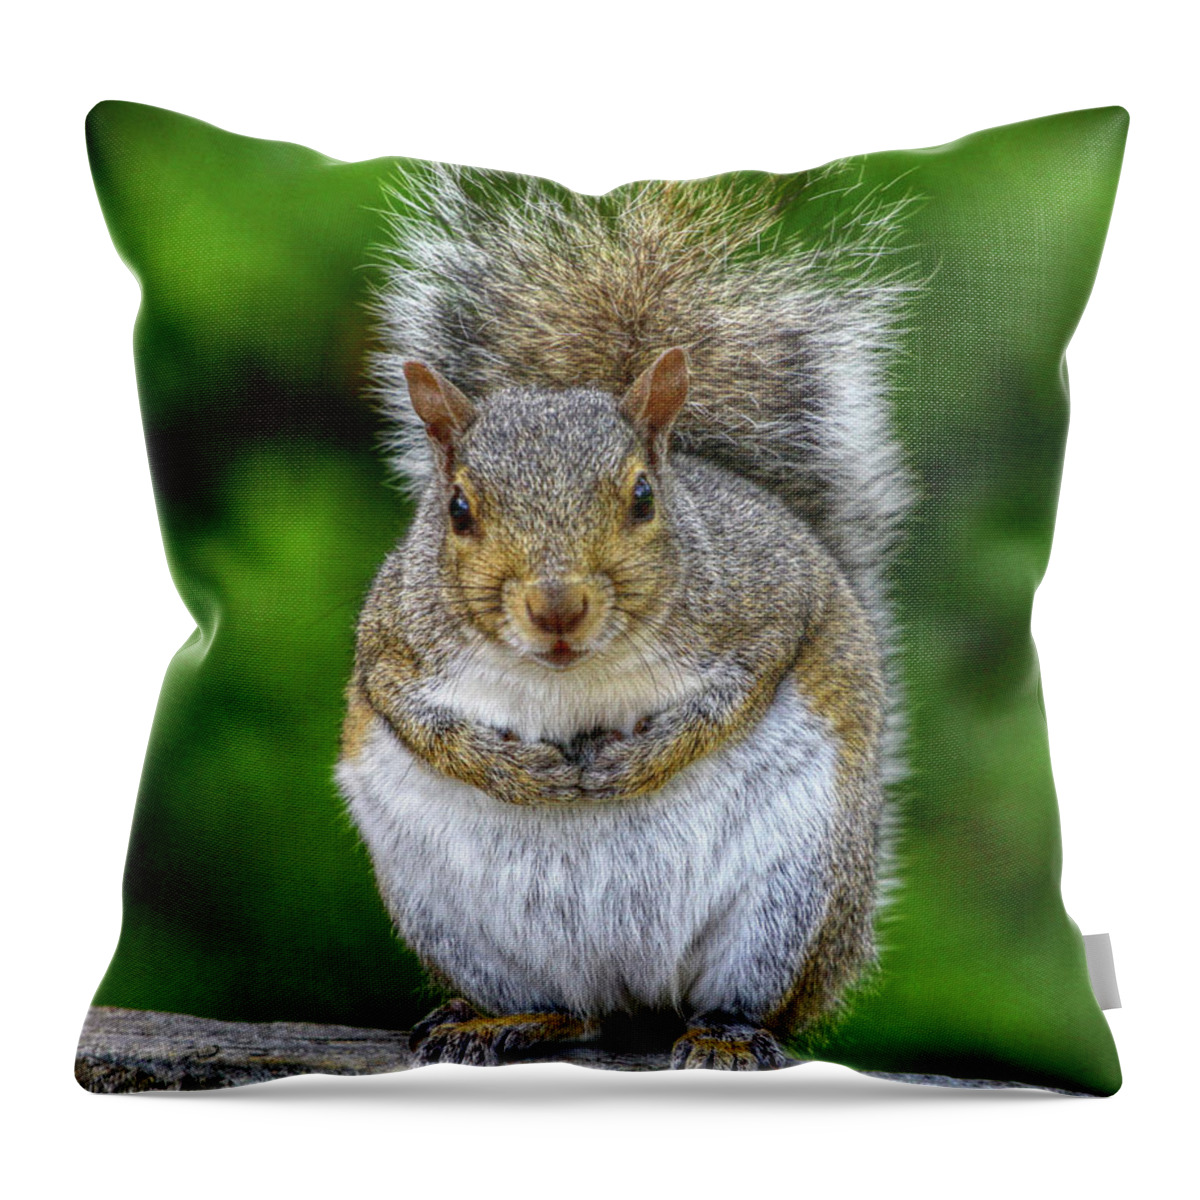 What Are You Looking At Throw Pillow featuring the digital art What Are You Looking At by Randy Steele